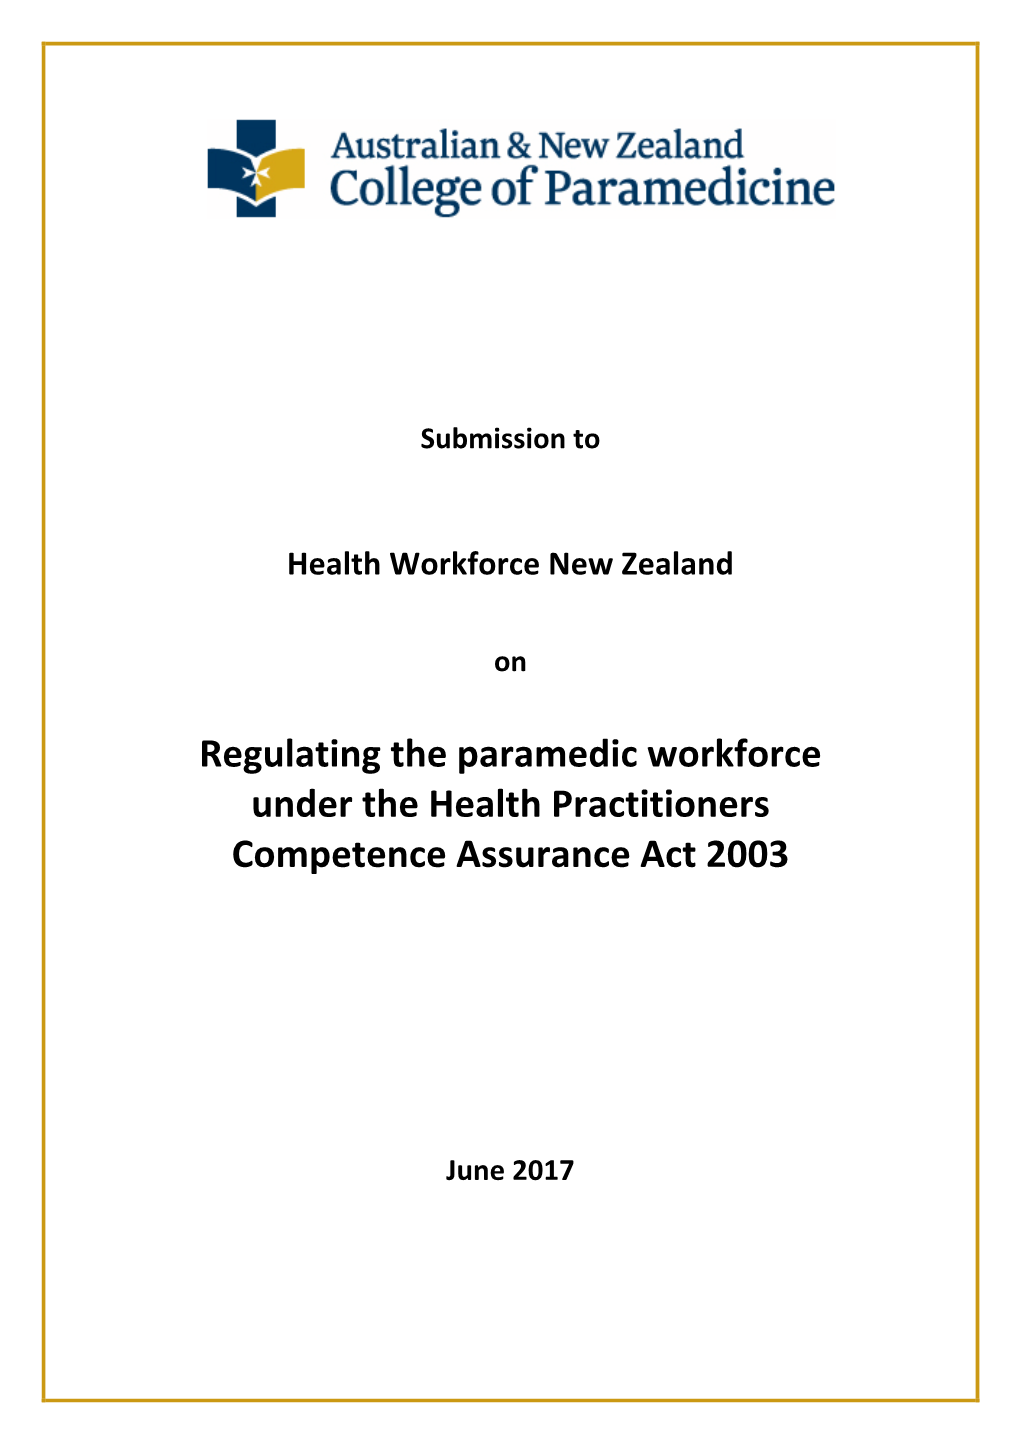 Regulating the Paramedic Workforce Under the Health Practitioners Competence Assurance Act 2003